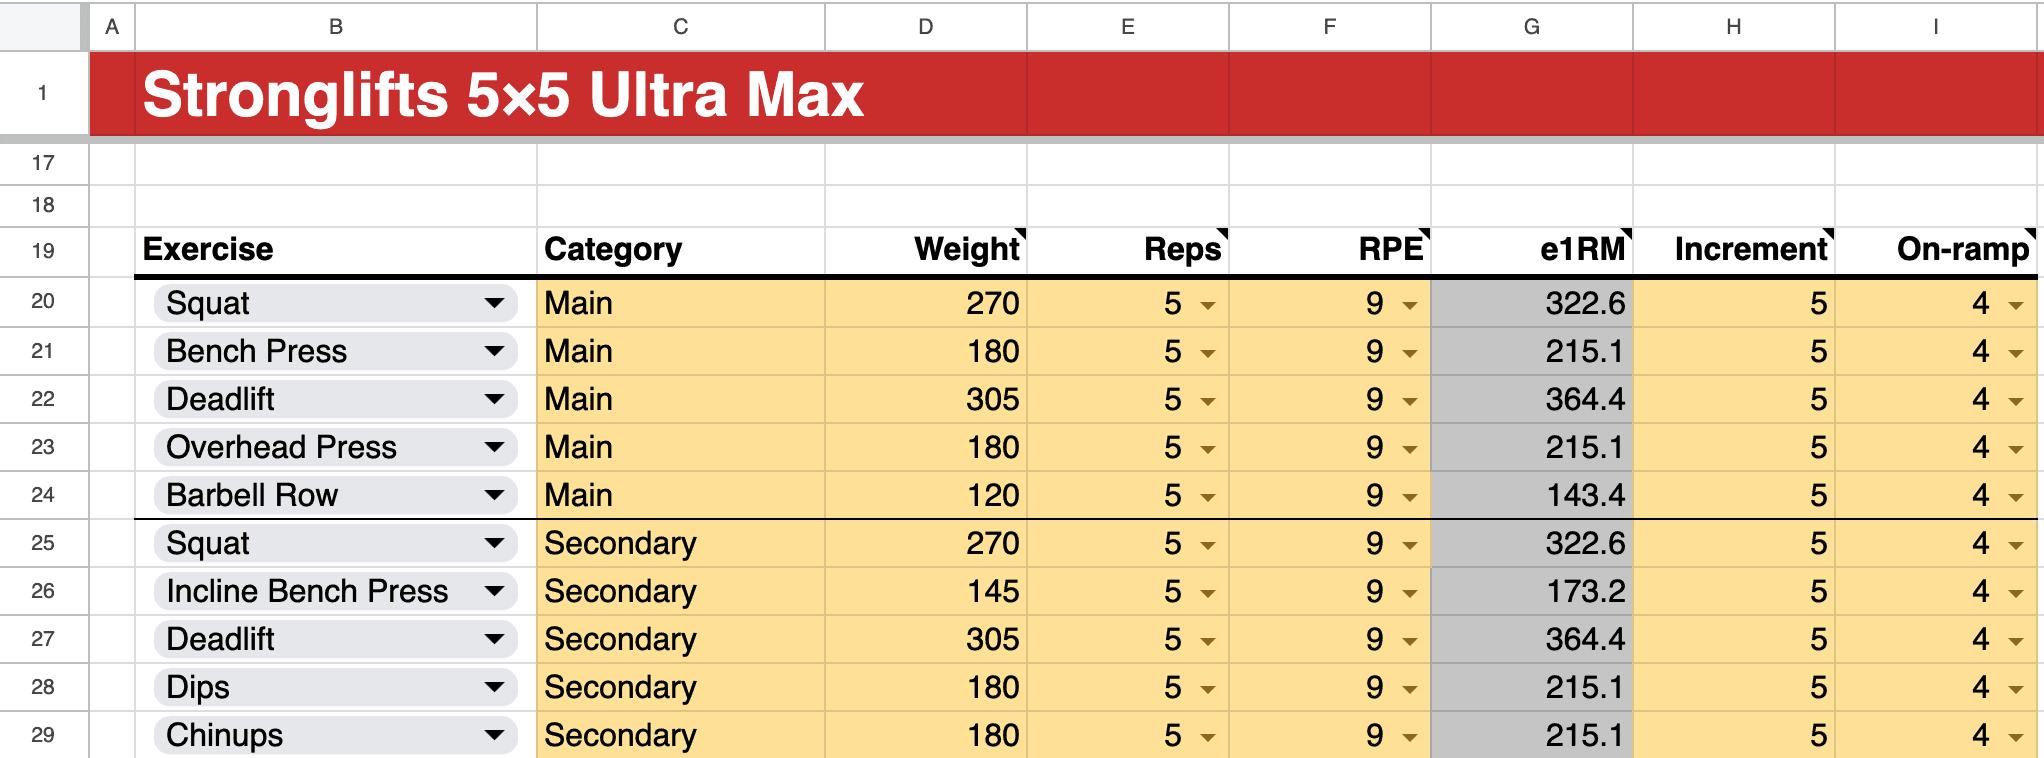 On-ramp settings Stronglifts 5x5 Ultra Max spreadsheet